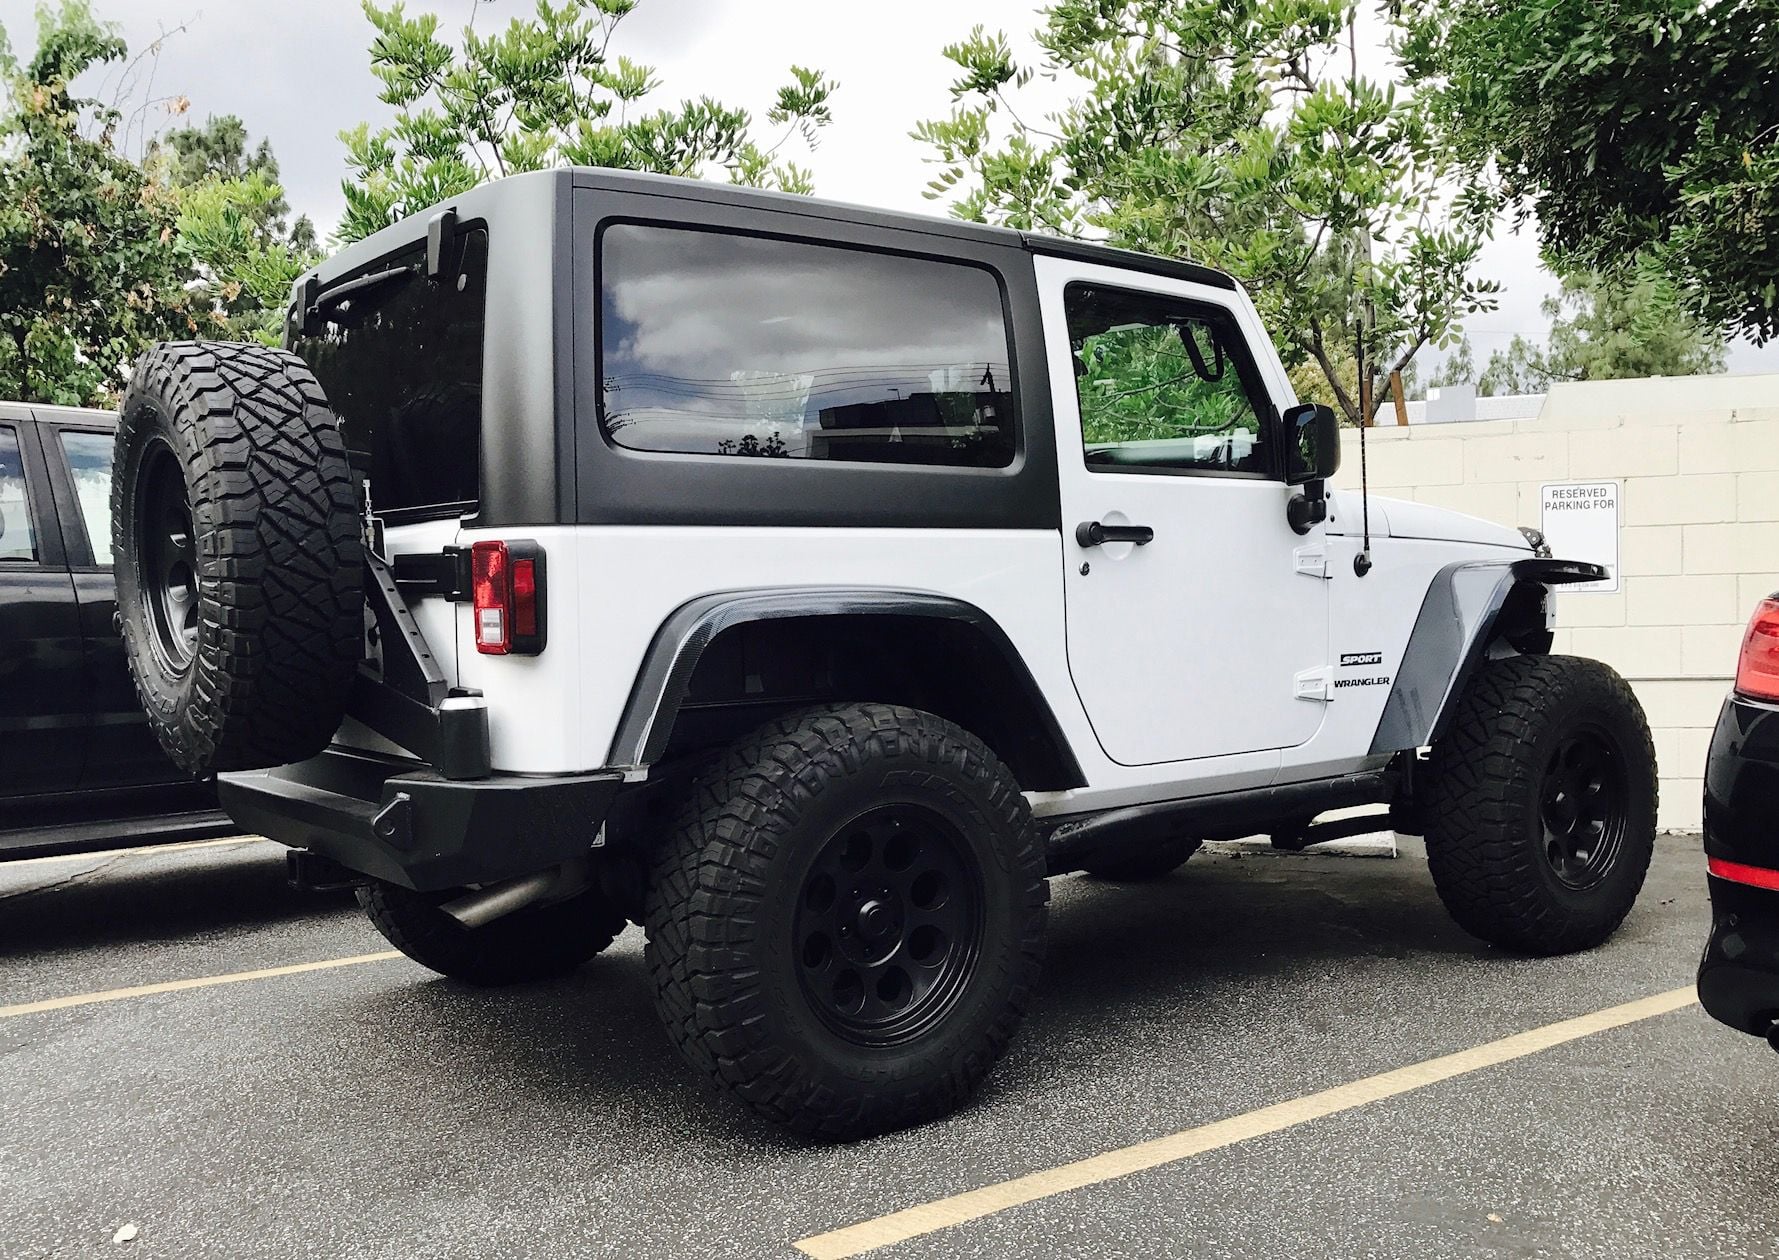 Exterior Body Parts - For Sale: MCE Fender Flare Set - Used - 2007 to 2018 Jeep Wrangler - Glendale, CA 91202, United States